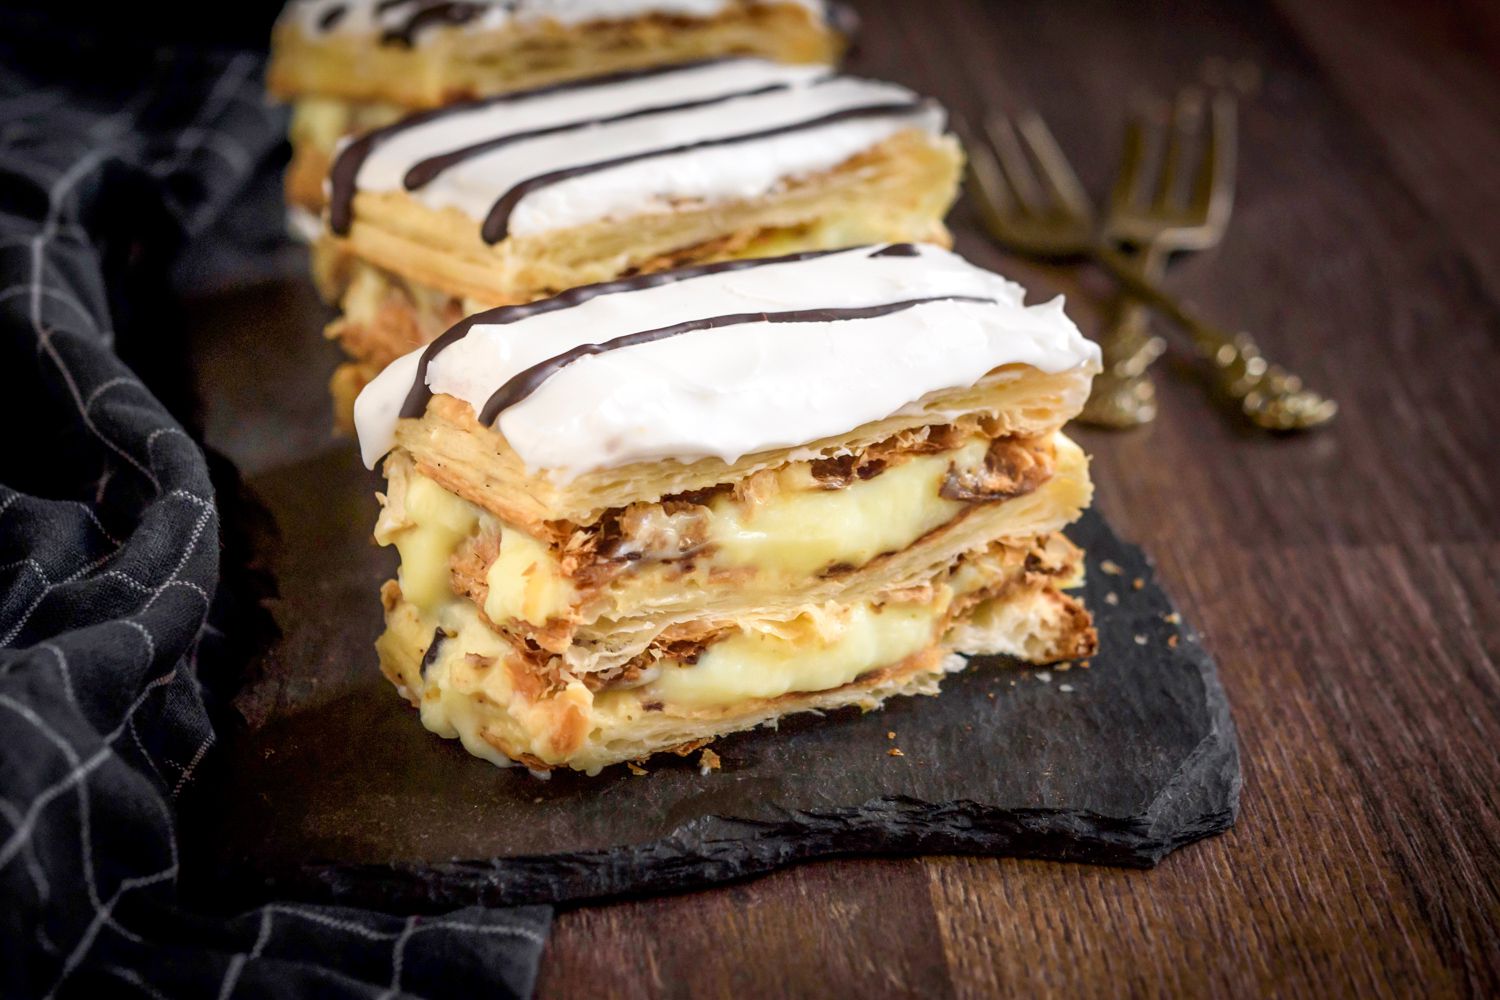 🍰 Only a Baked Good Connoisseur Will Have Eaten at Least 20/39 of These Foods Mille feuille